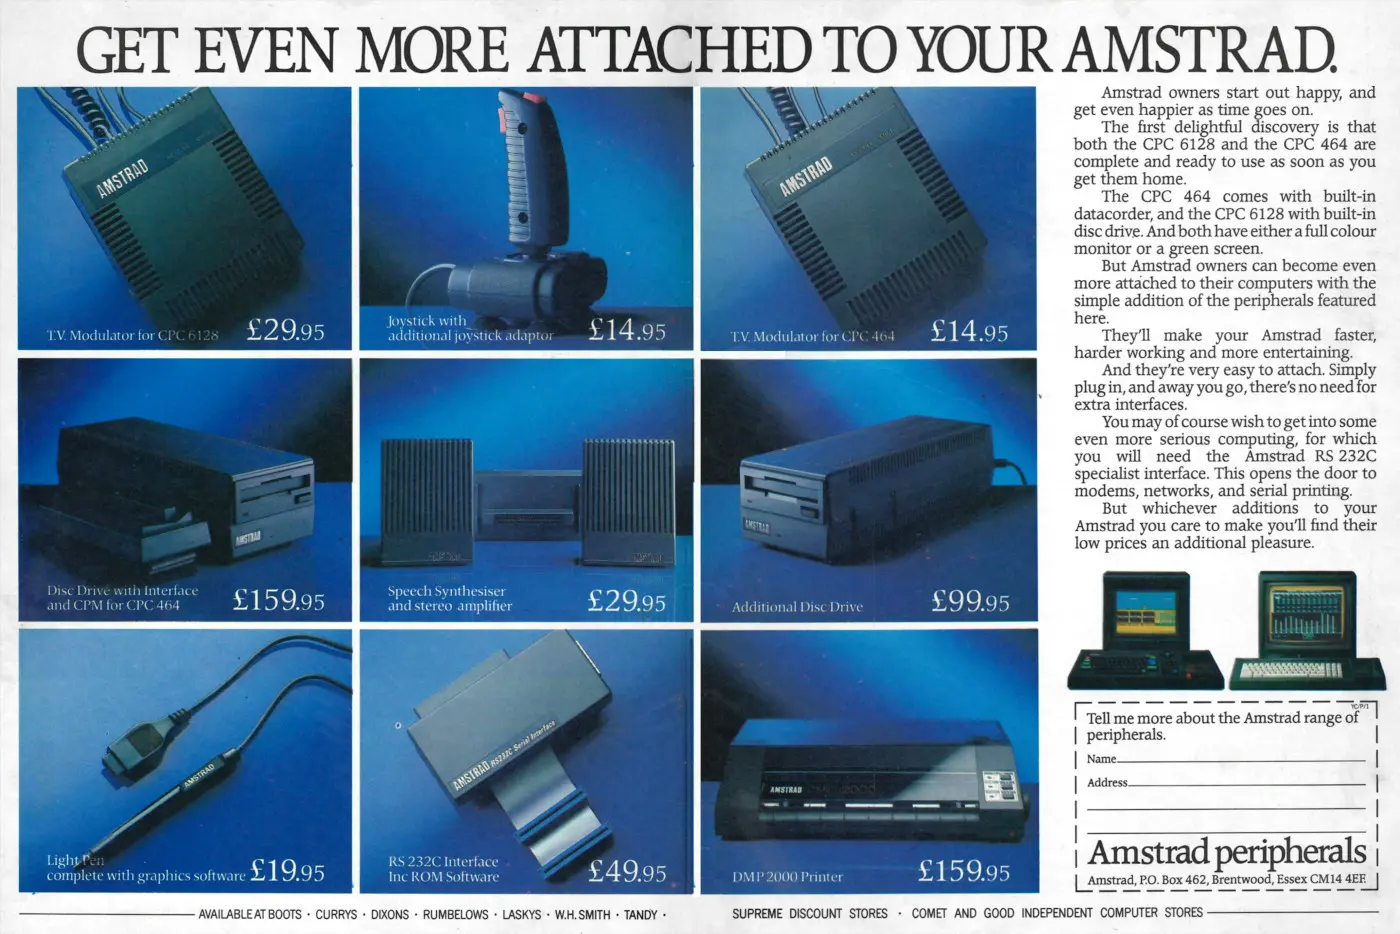 Amstrad Advert: Get even more attached to your Amstrad, from Your Computer, September 1985